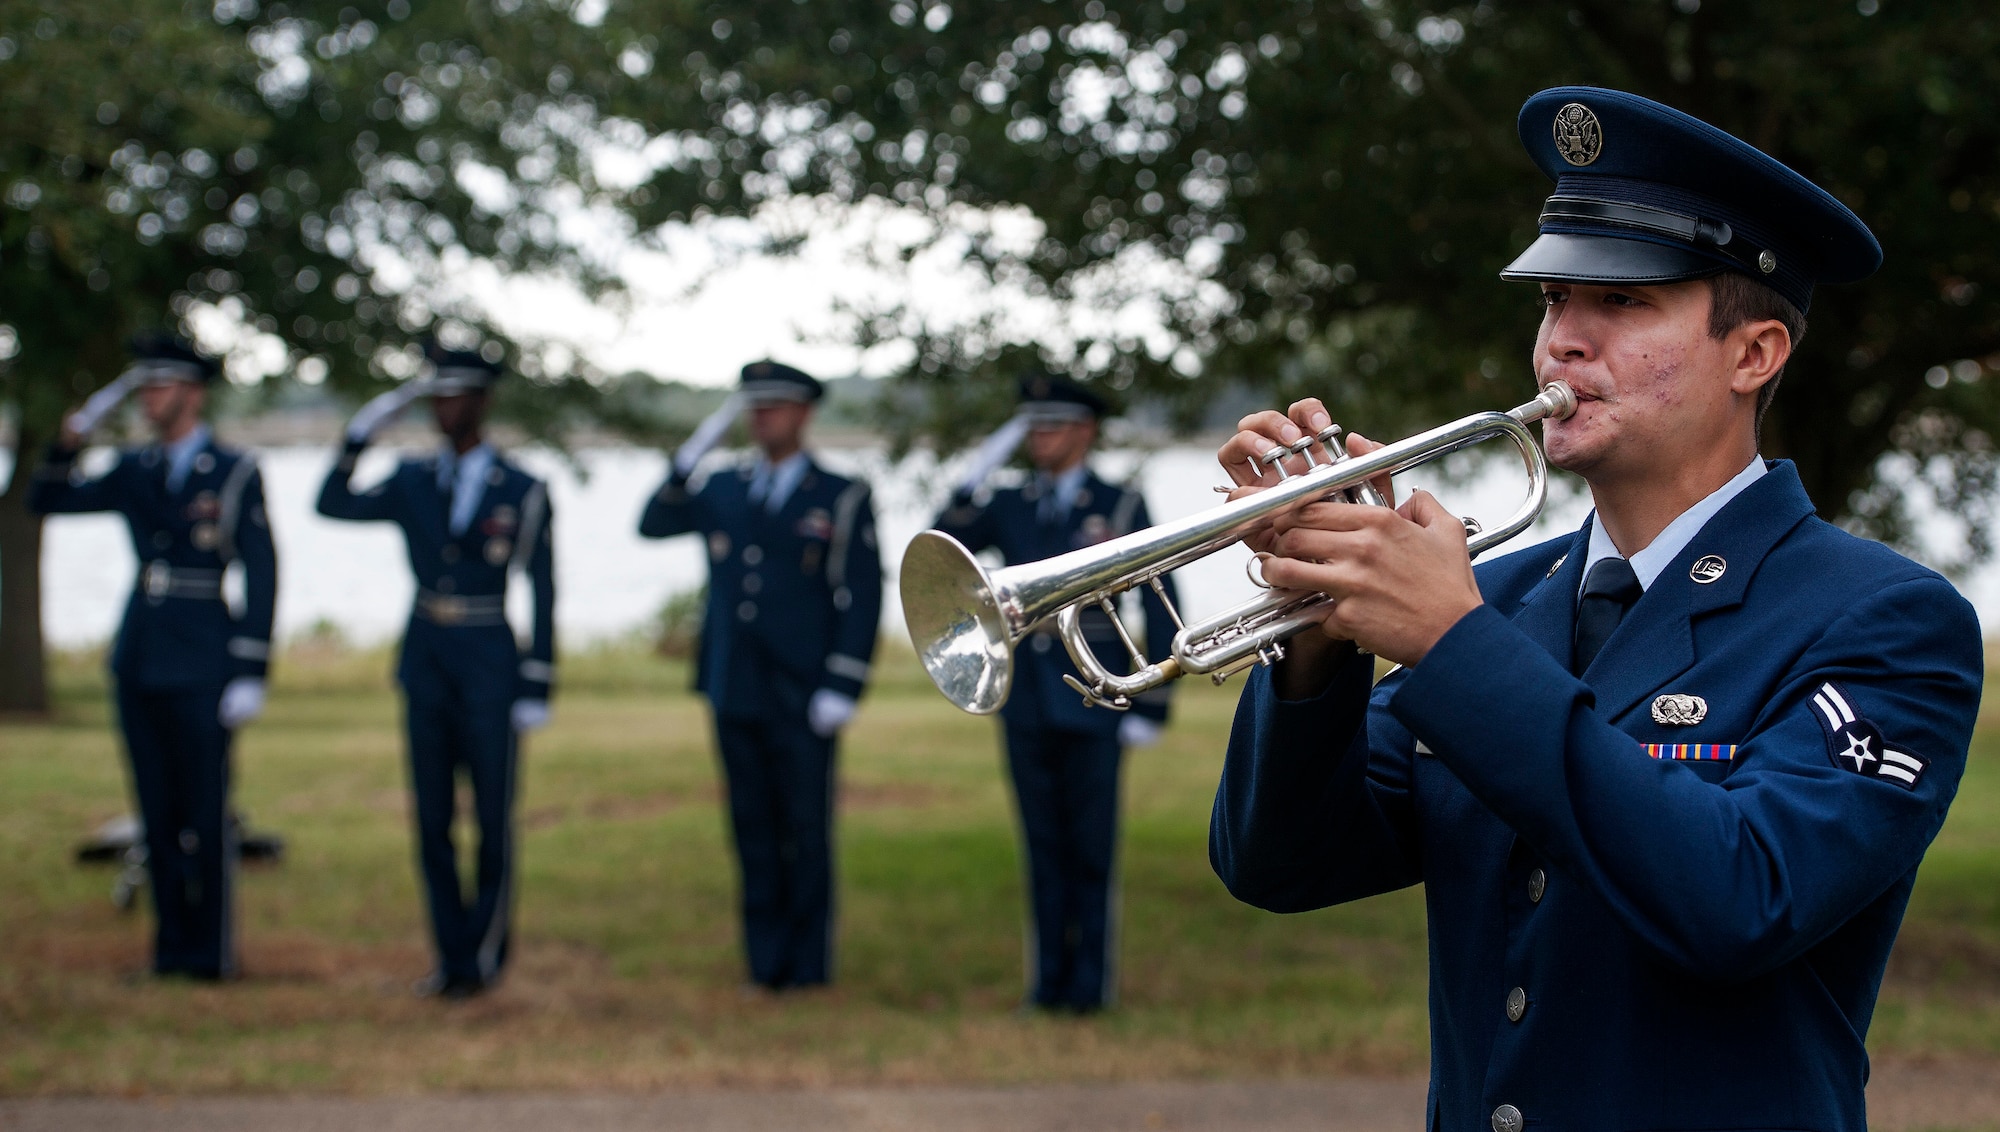 Airman 1st Class Owen Cox, the 633rd Air Base Wing Honor Guard member, plays Taps during a Prisoner of War/Missing in Action closing ceremony at Joint Base Langley-Eustis, Va., Sept. 16, 2016. Taps was created in 1932 by General Daniel Butterfield and is used in connection with military funerals, memorial events and to signify the beginning of the long last sleep at the end of a service member’s life or at the end of the duty day. (U.S. Air Force photo by Staff Sgt. Nick Wilson/Released)